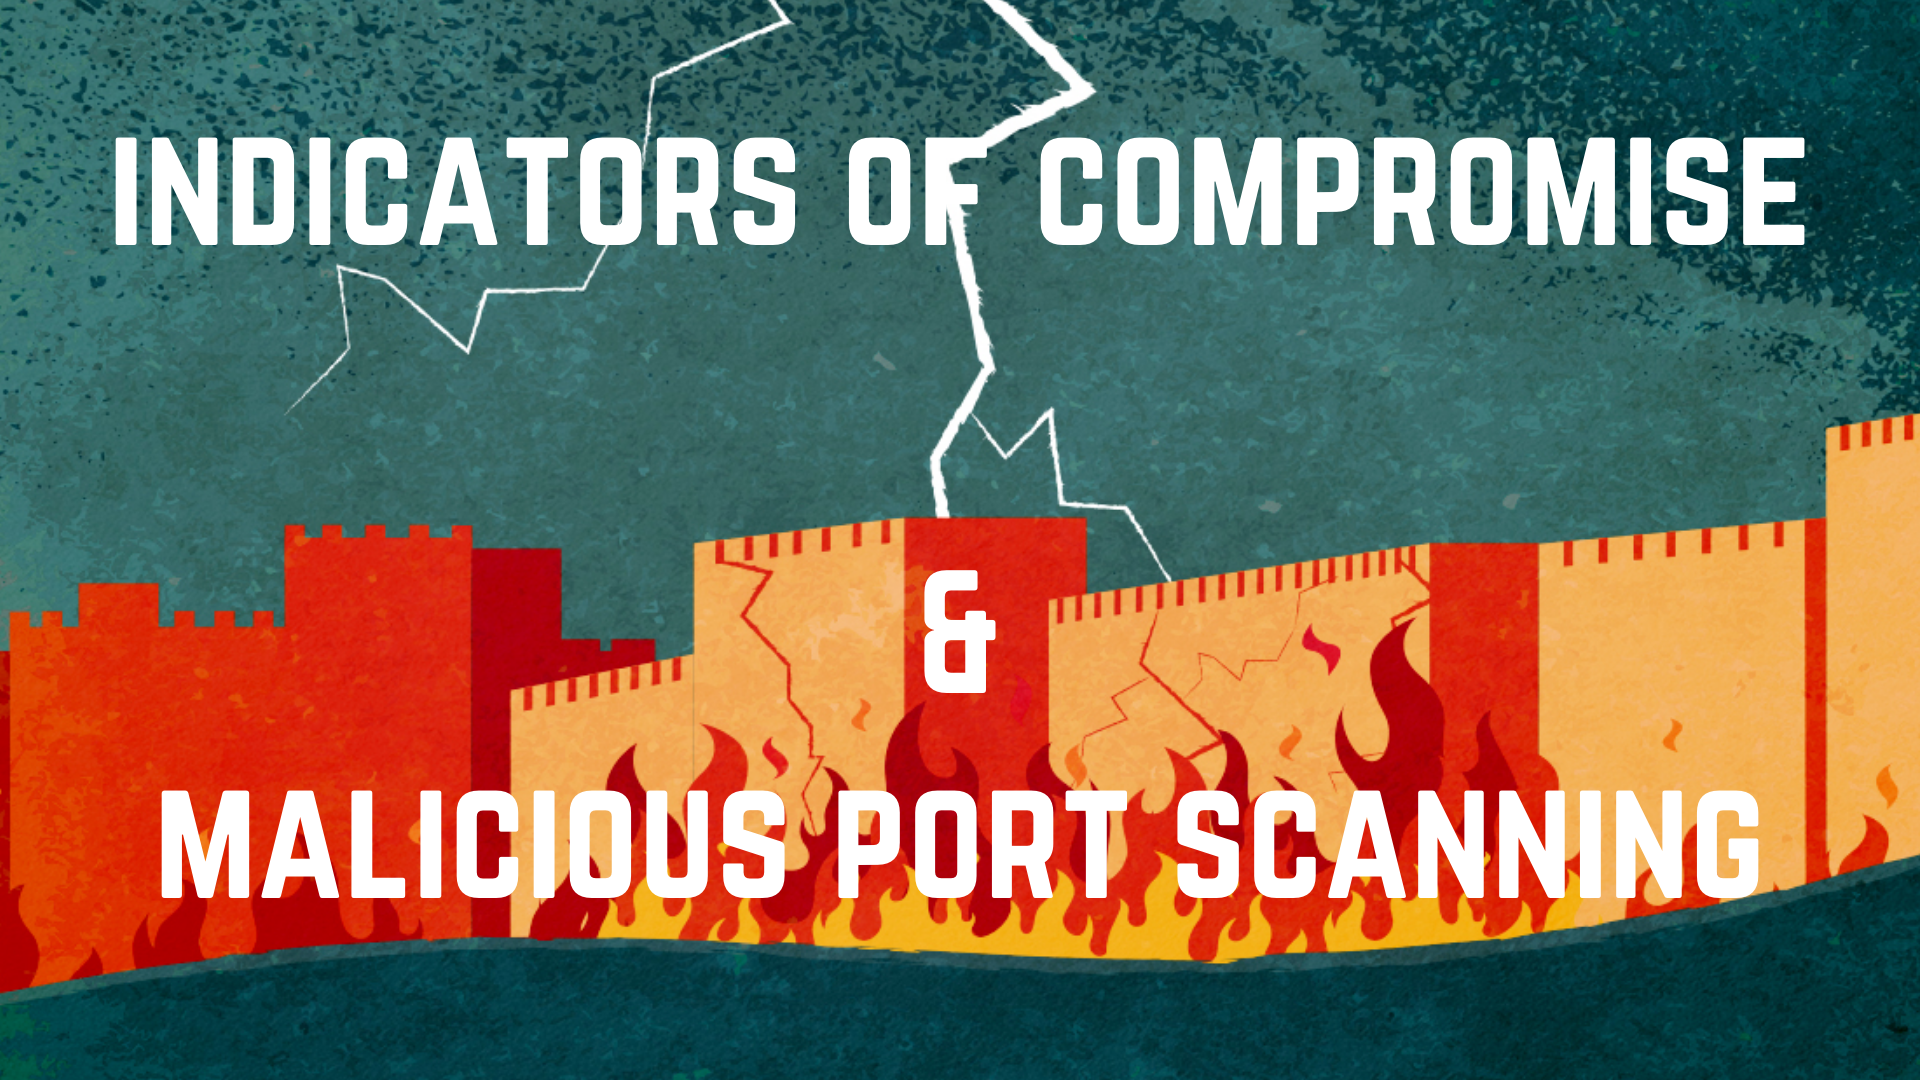 Port Scanning based Attacks | All you want to know